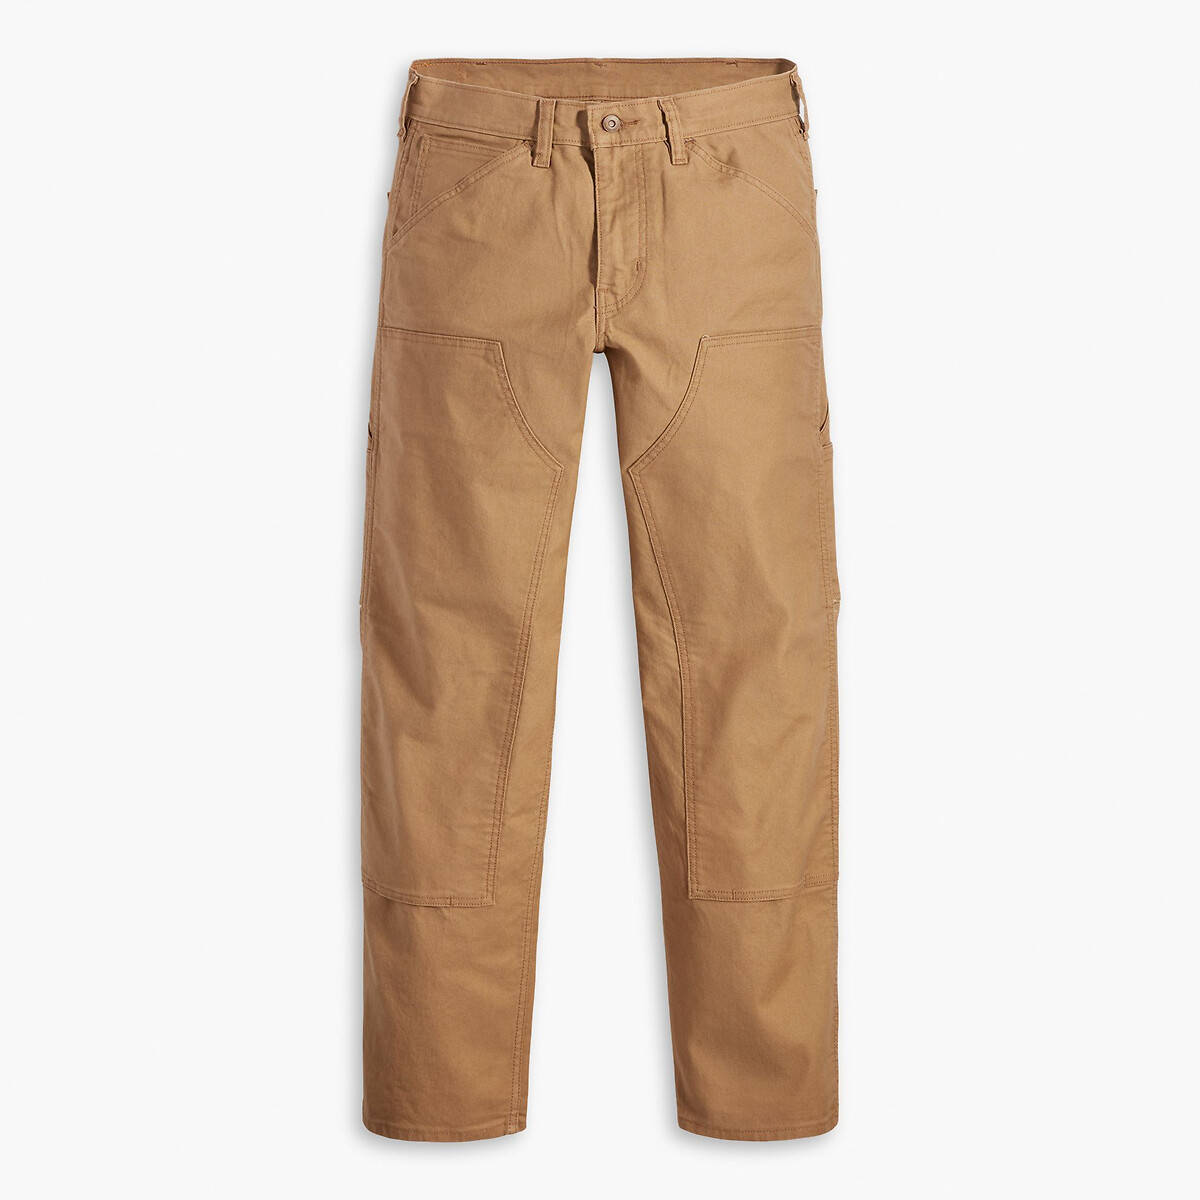 Image of Cotton Workwear Carpenter Trousers